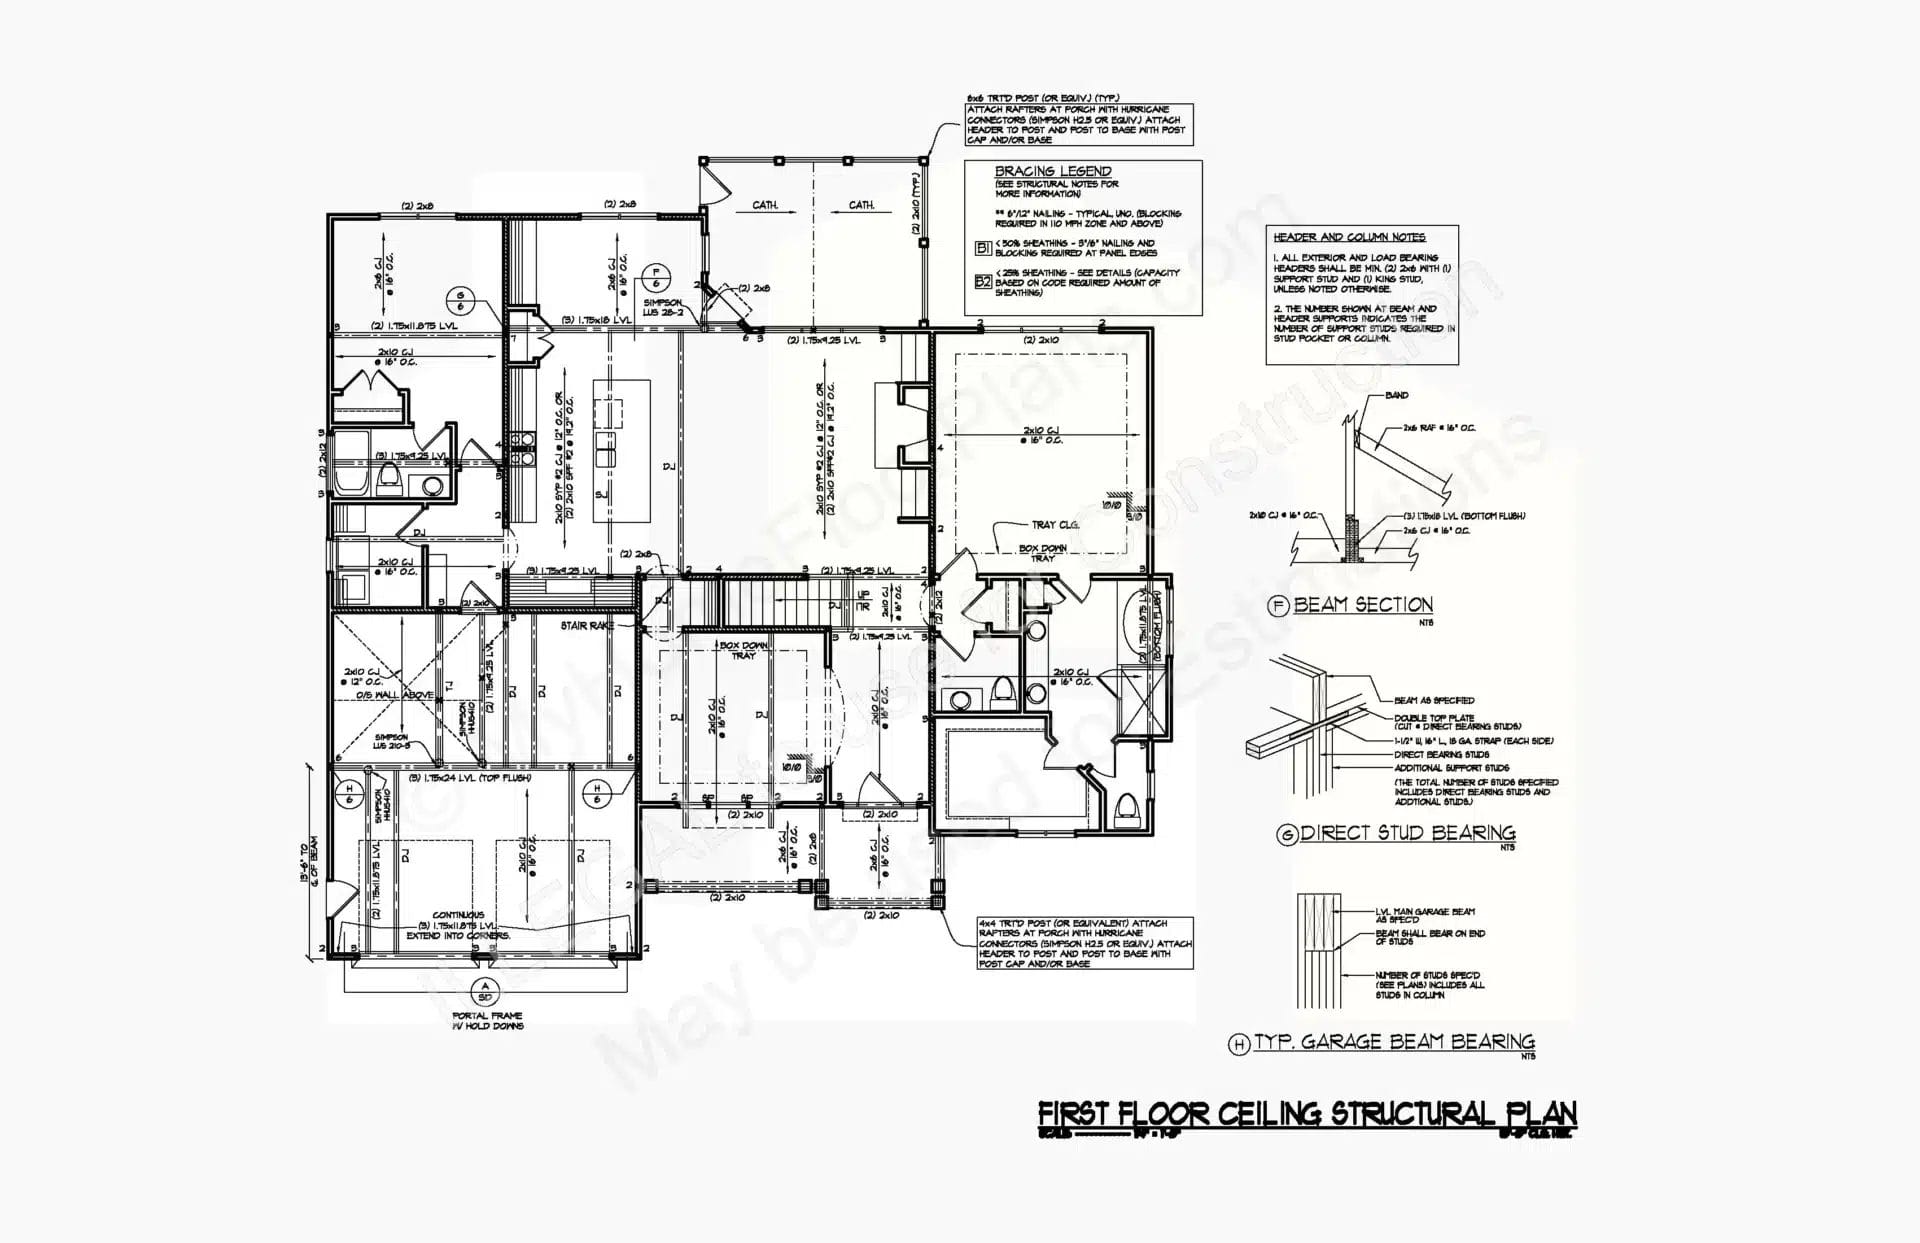 An architectural blueprint displaying the first-floor ceiling structural plan of a building. The design includes detailed measurements, labels, and specifications, such as beam sections and room layouts of the 13-1214 product.